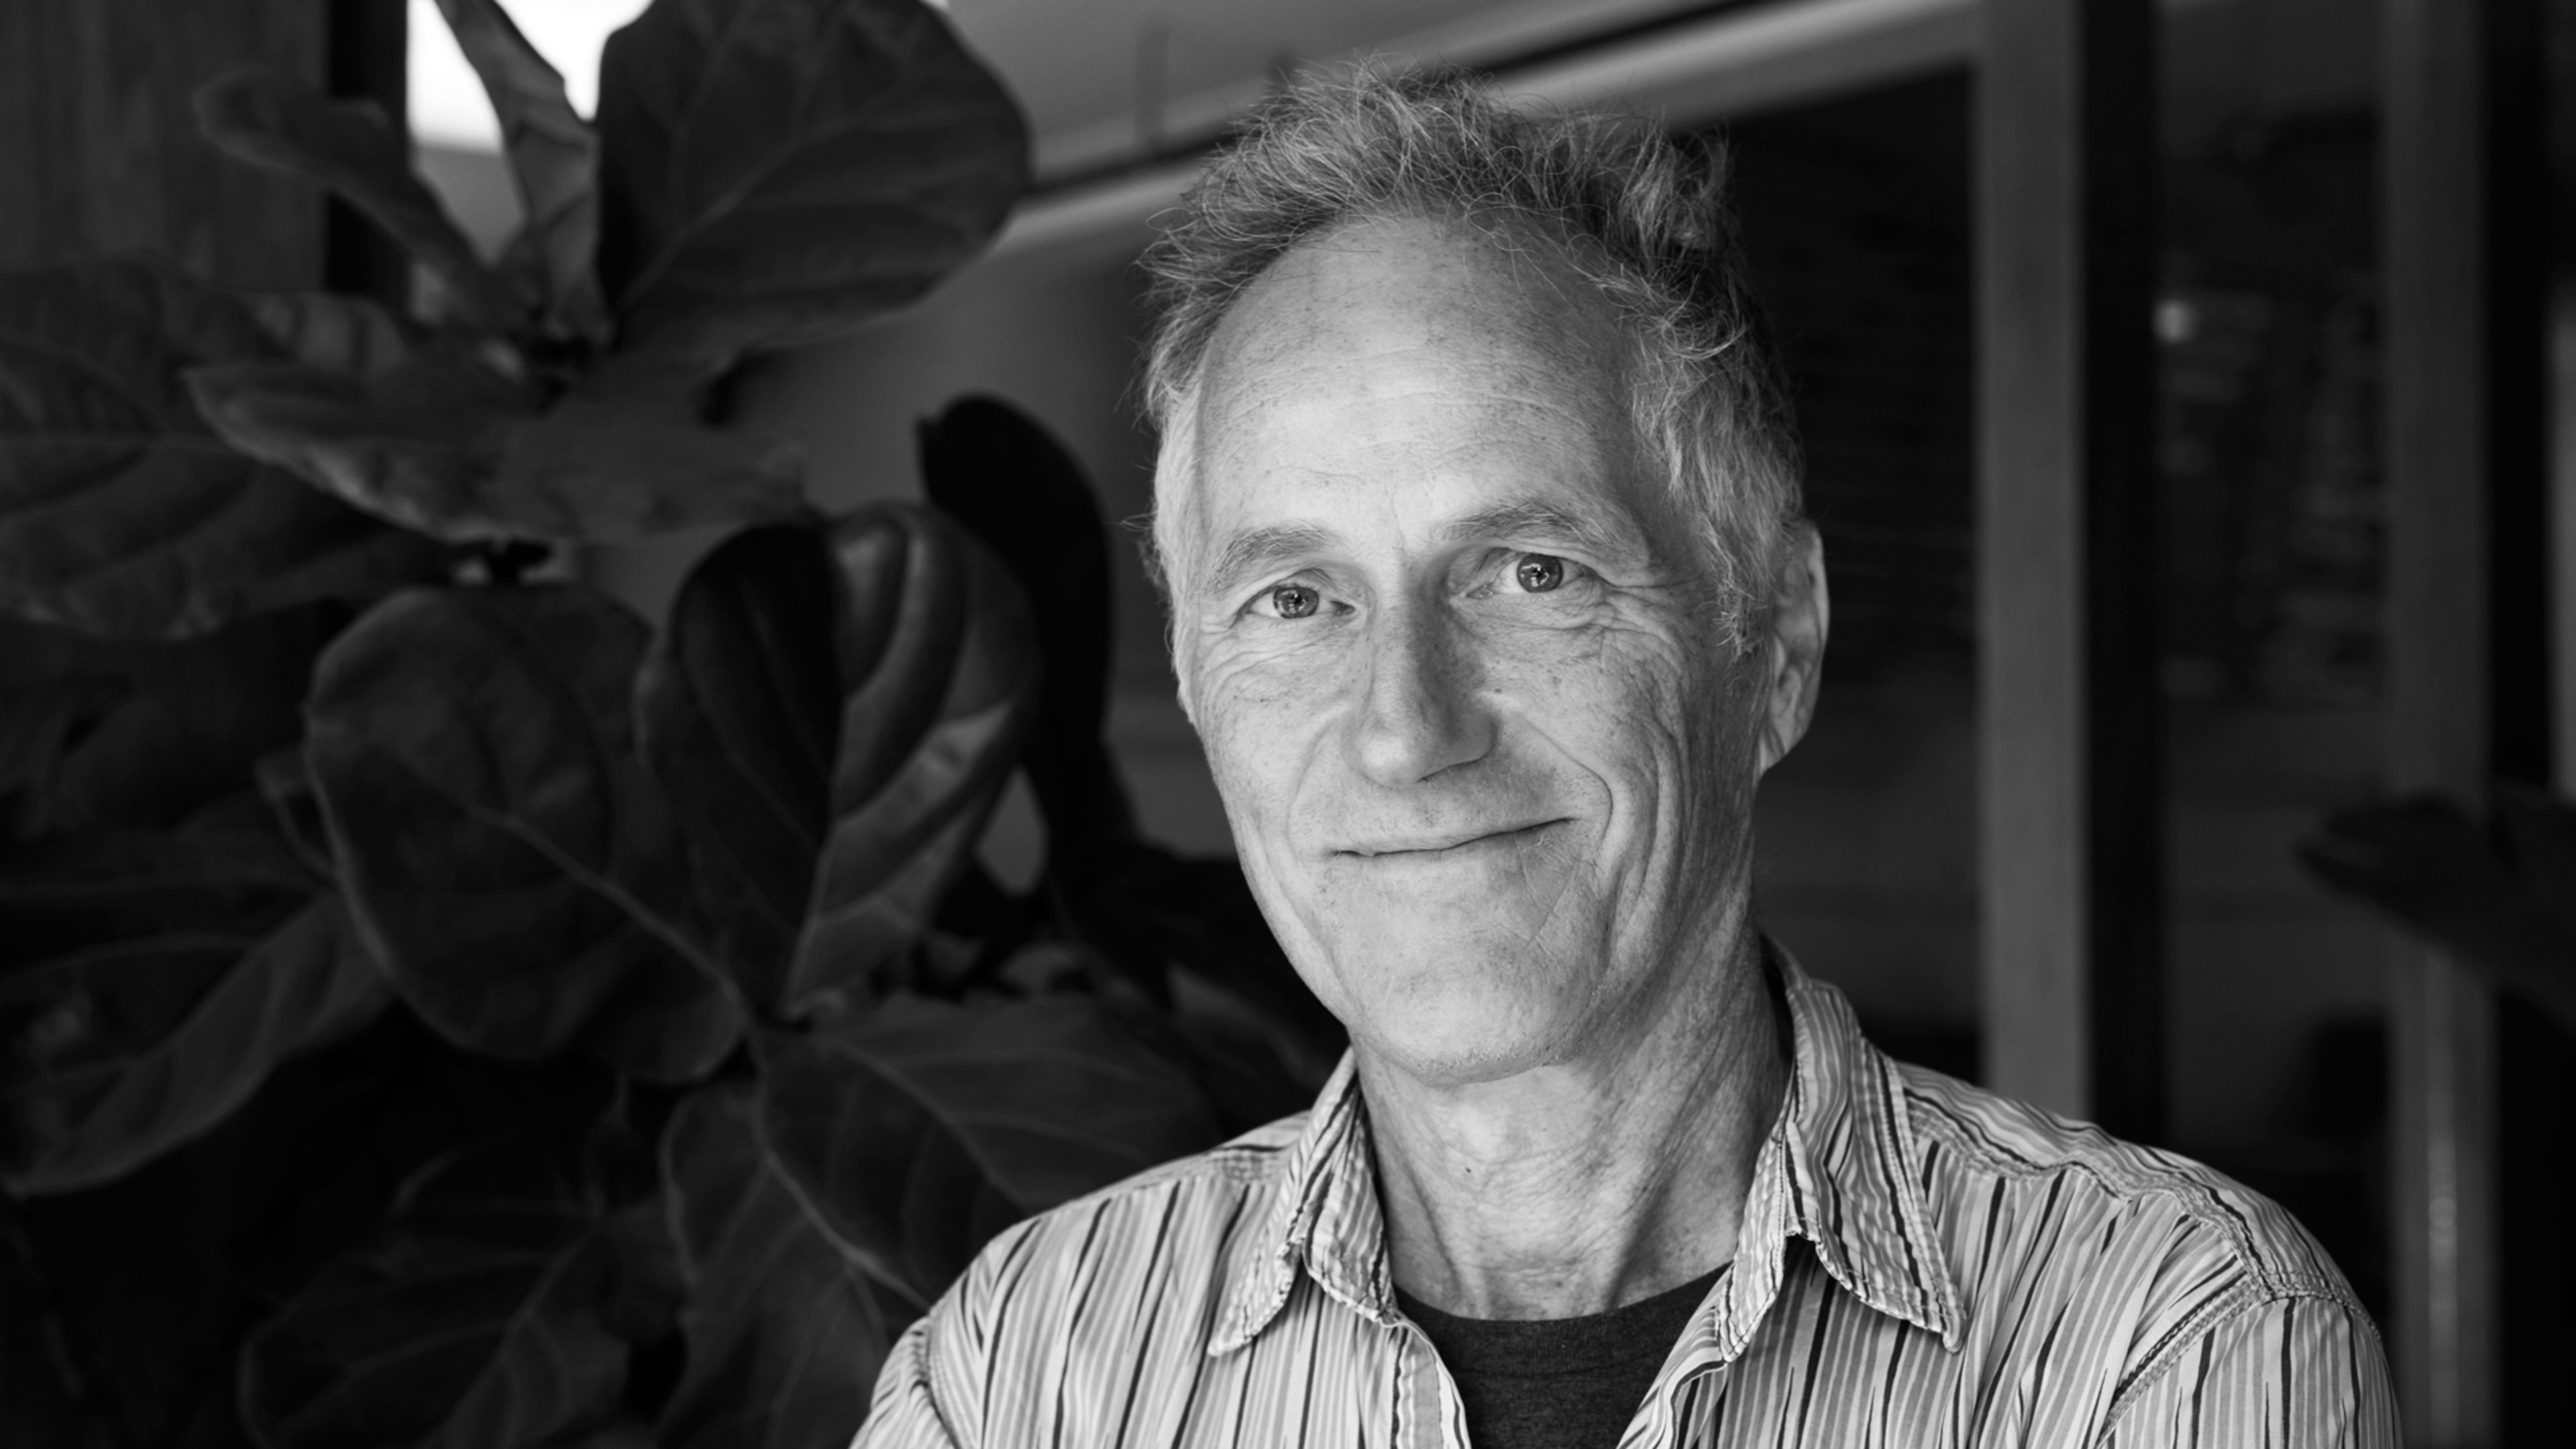 LISTEN: Tim O’Reilly Eyes The Future Of The Tech Industry By Peering Into The Past